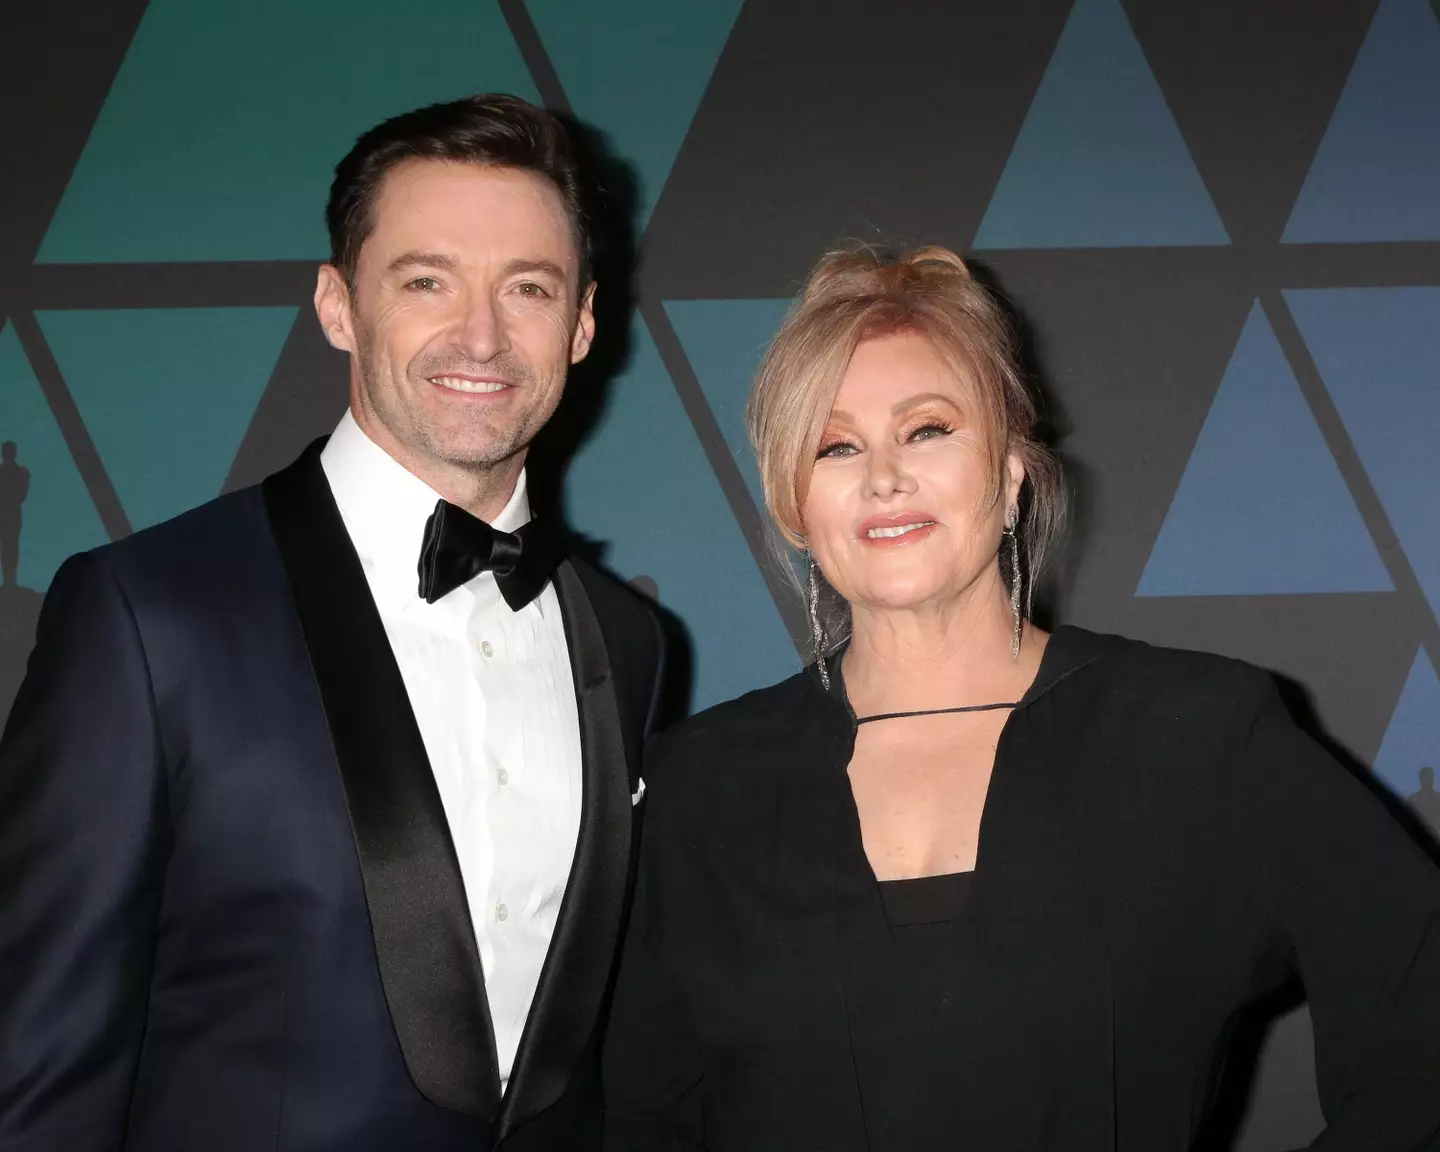 Jackman joked he wouldn't work with Jolie if his wife doesn't work with Brad Pitt.